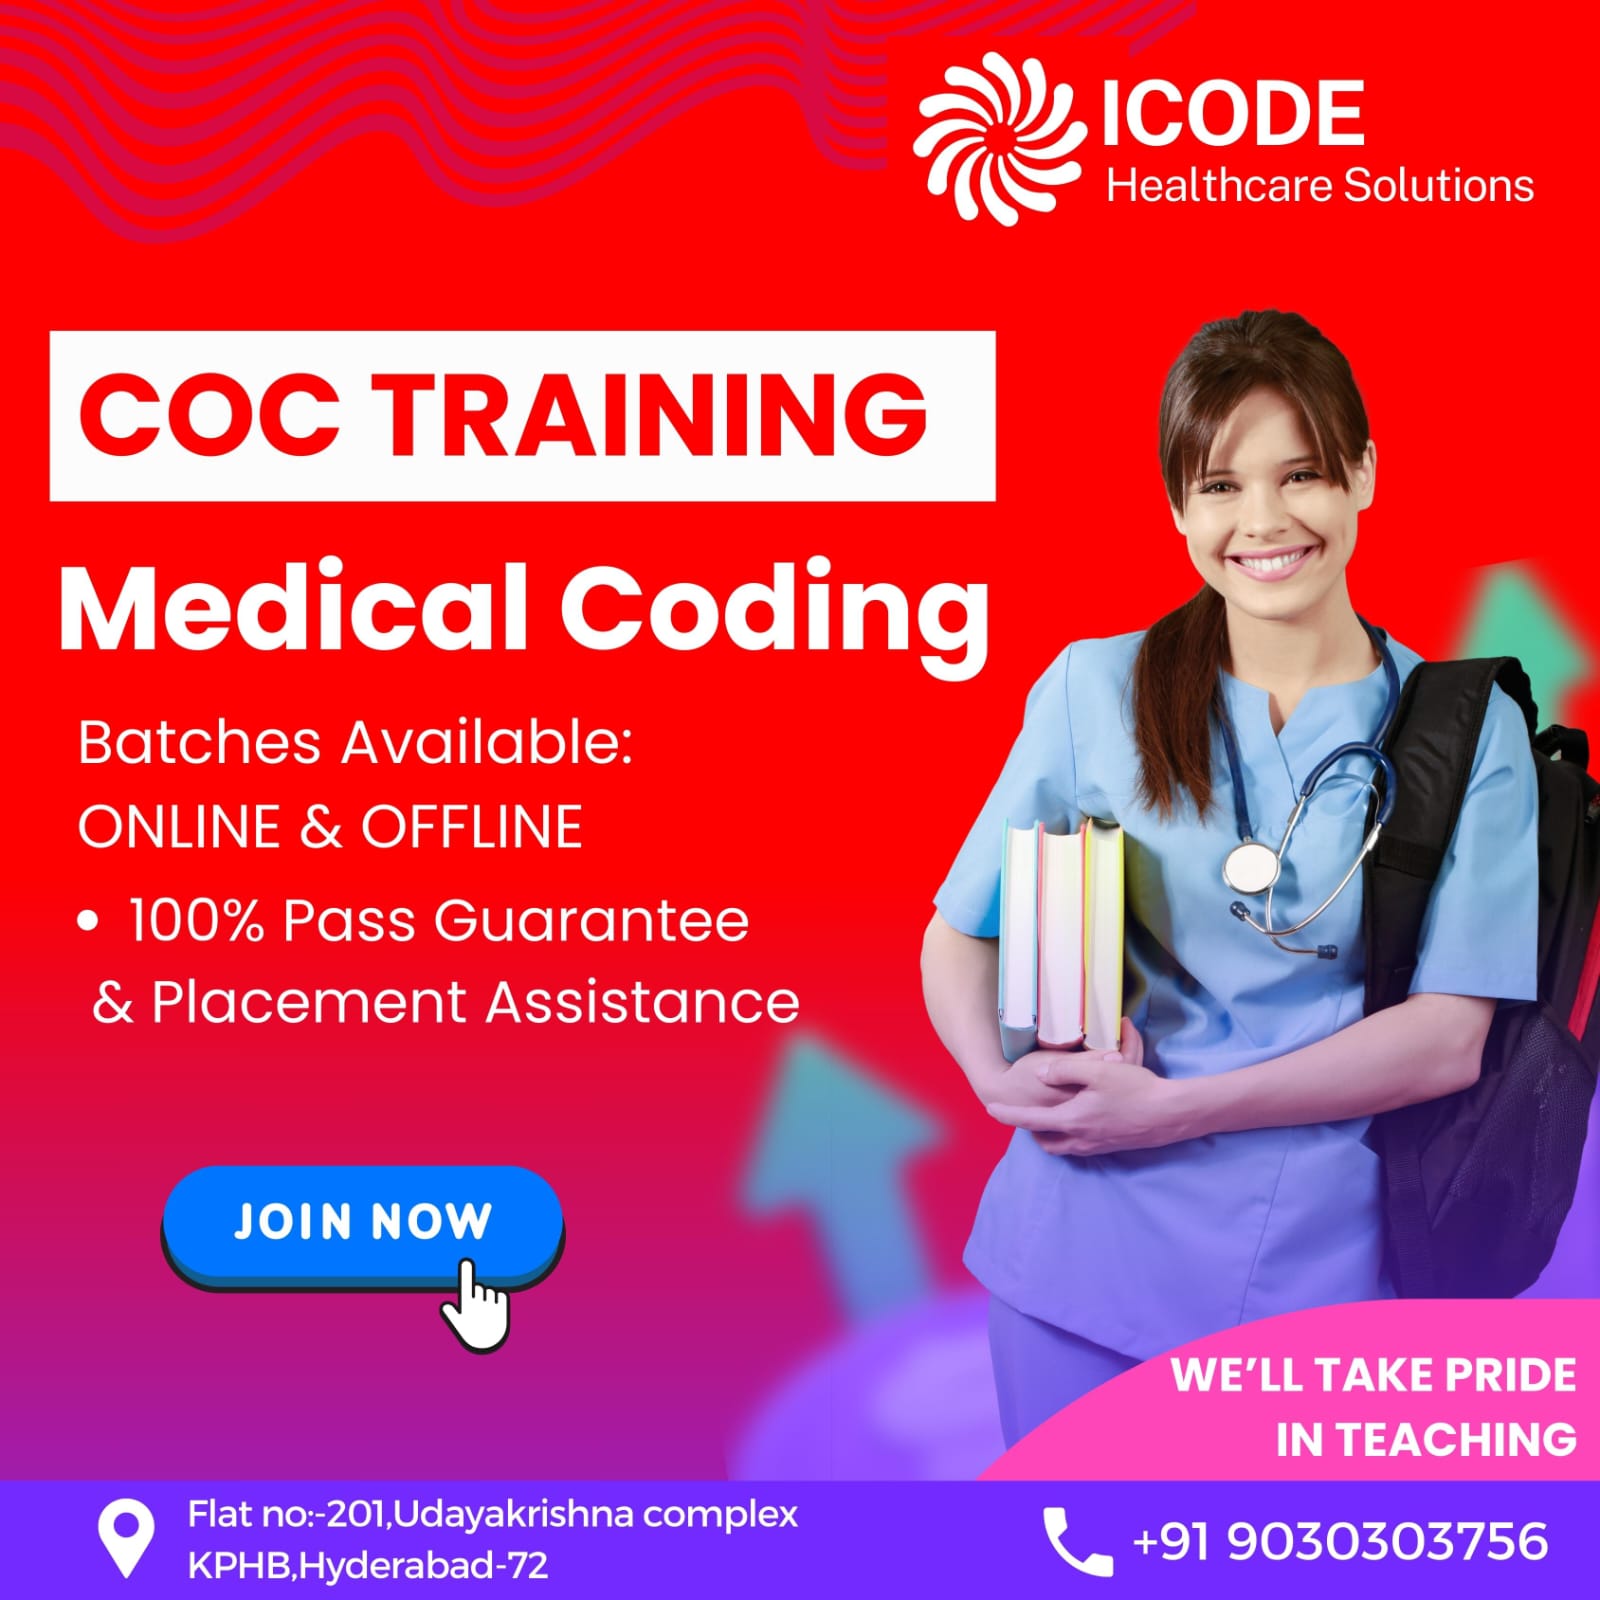 BEST MEDICAL CODING INSTITUTE IN KUKATPALLY HYDERABAD,Hyderabad,Educational & Institute,Free Classifieds,Post Free Ads,77traders.com